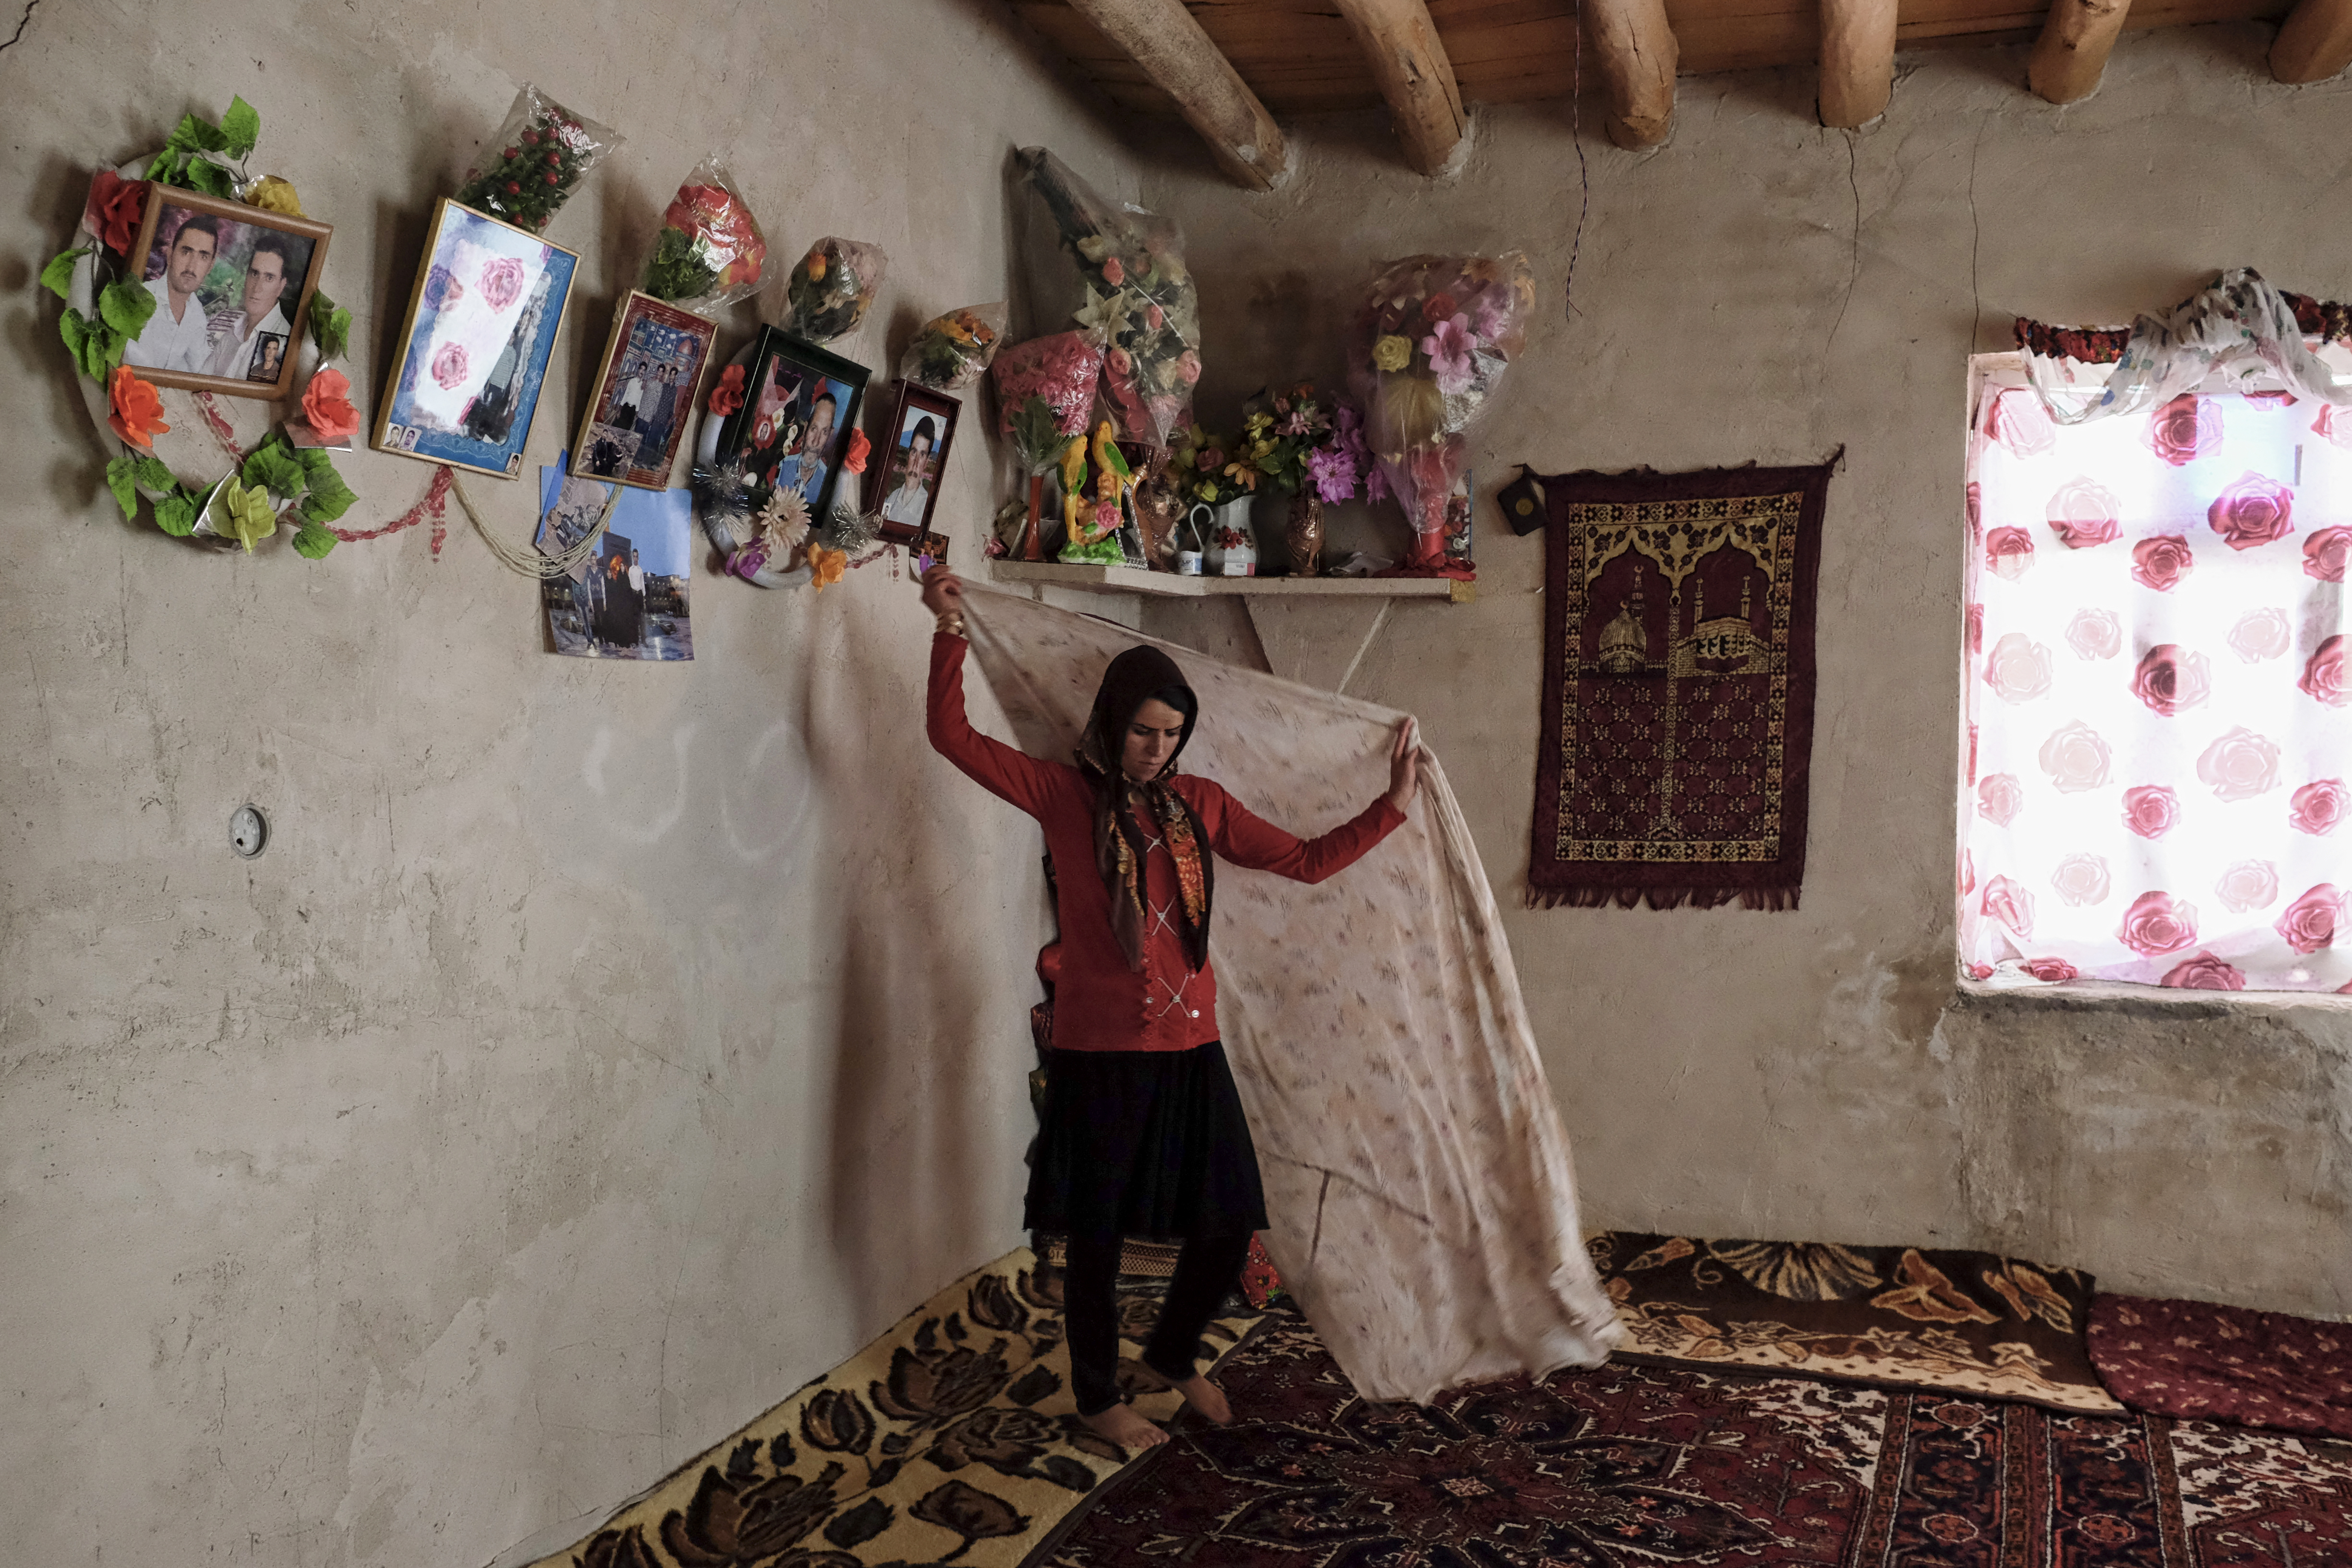 Roghayyeh in the room where she usually sleeps, stands alone below family photos. Ajabshir, East Azerbaijan, Iran.